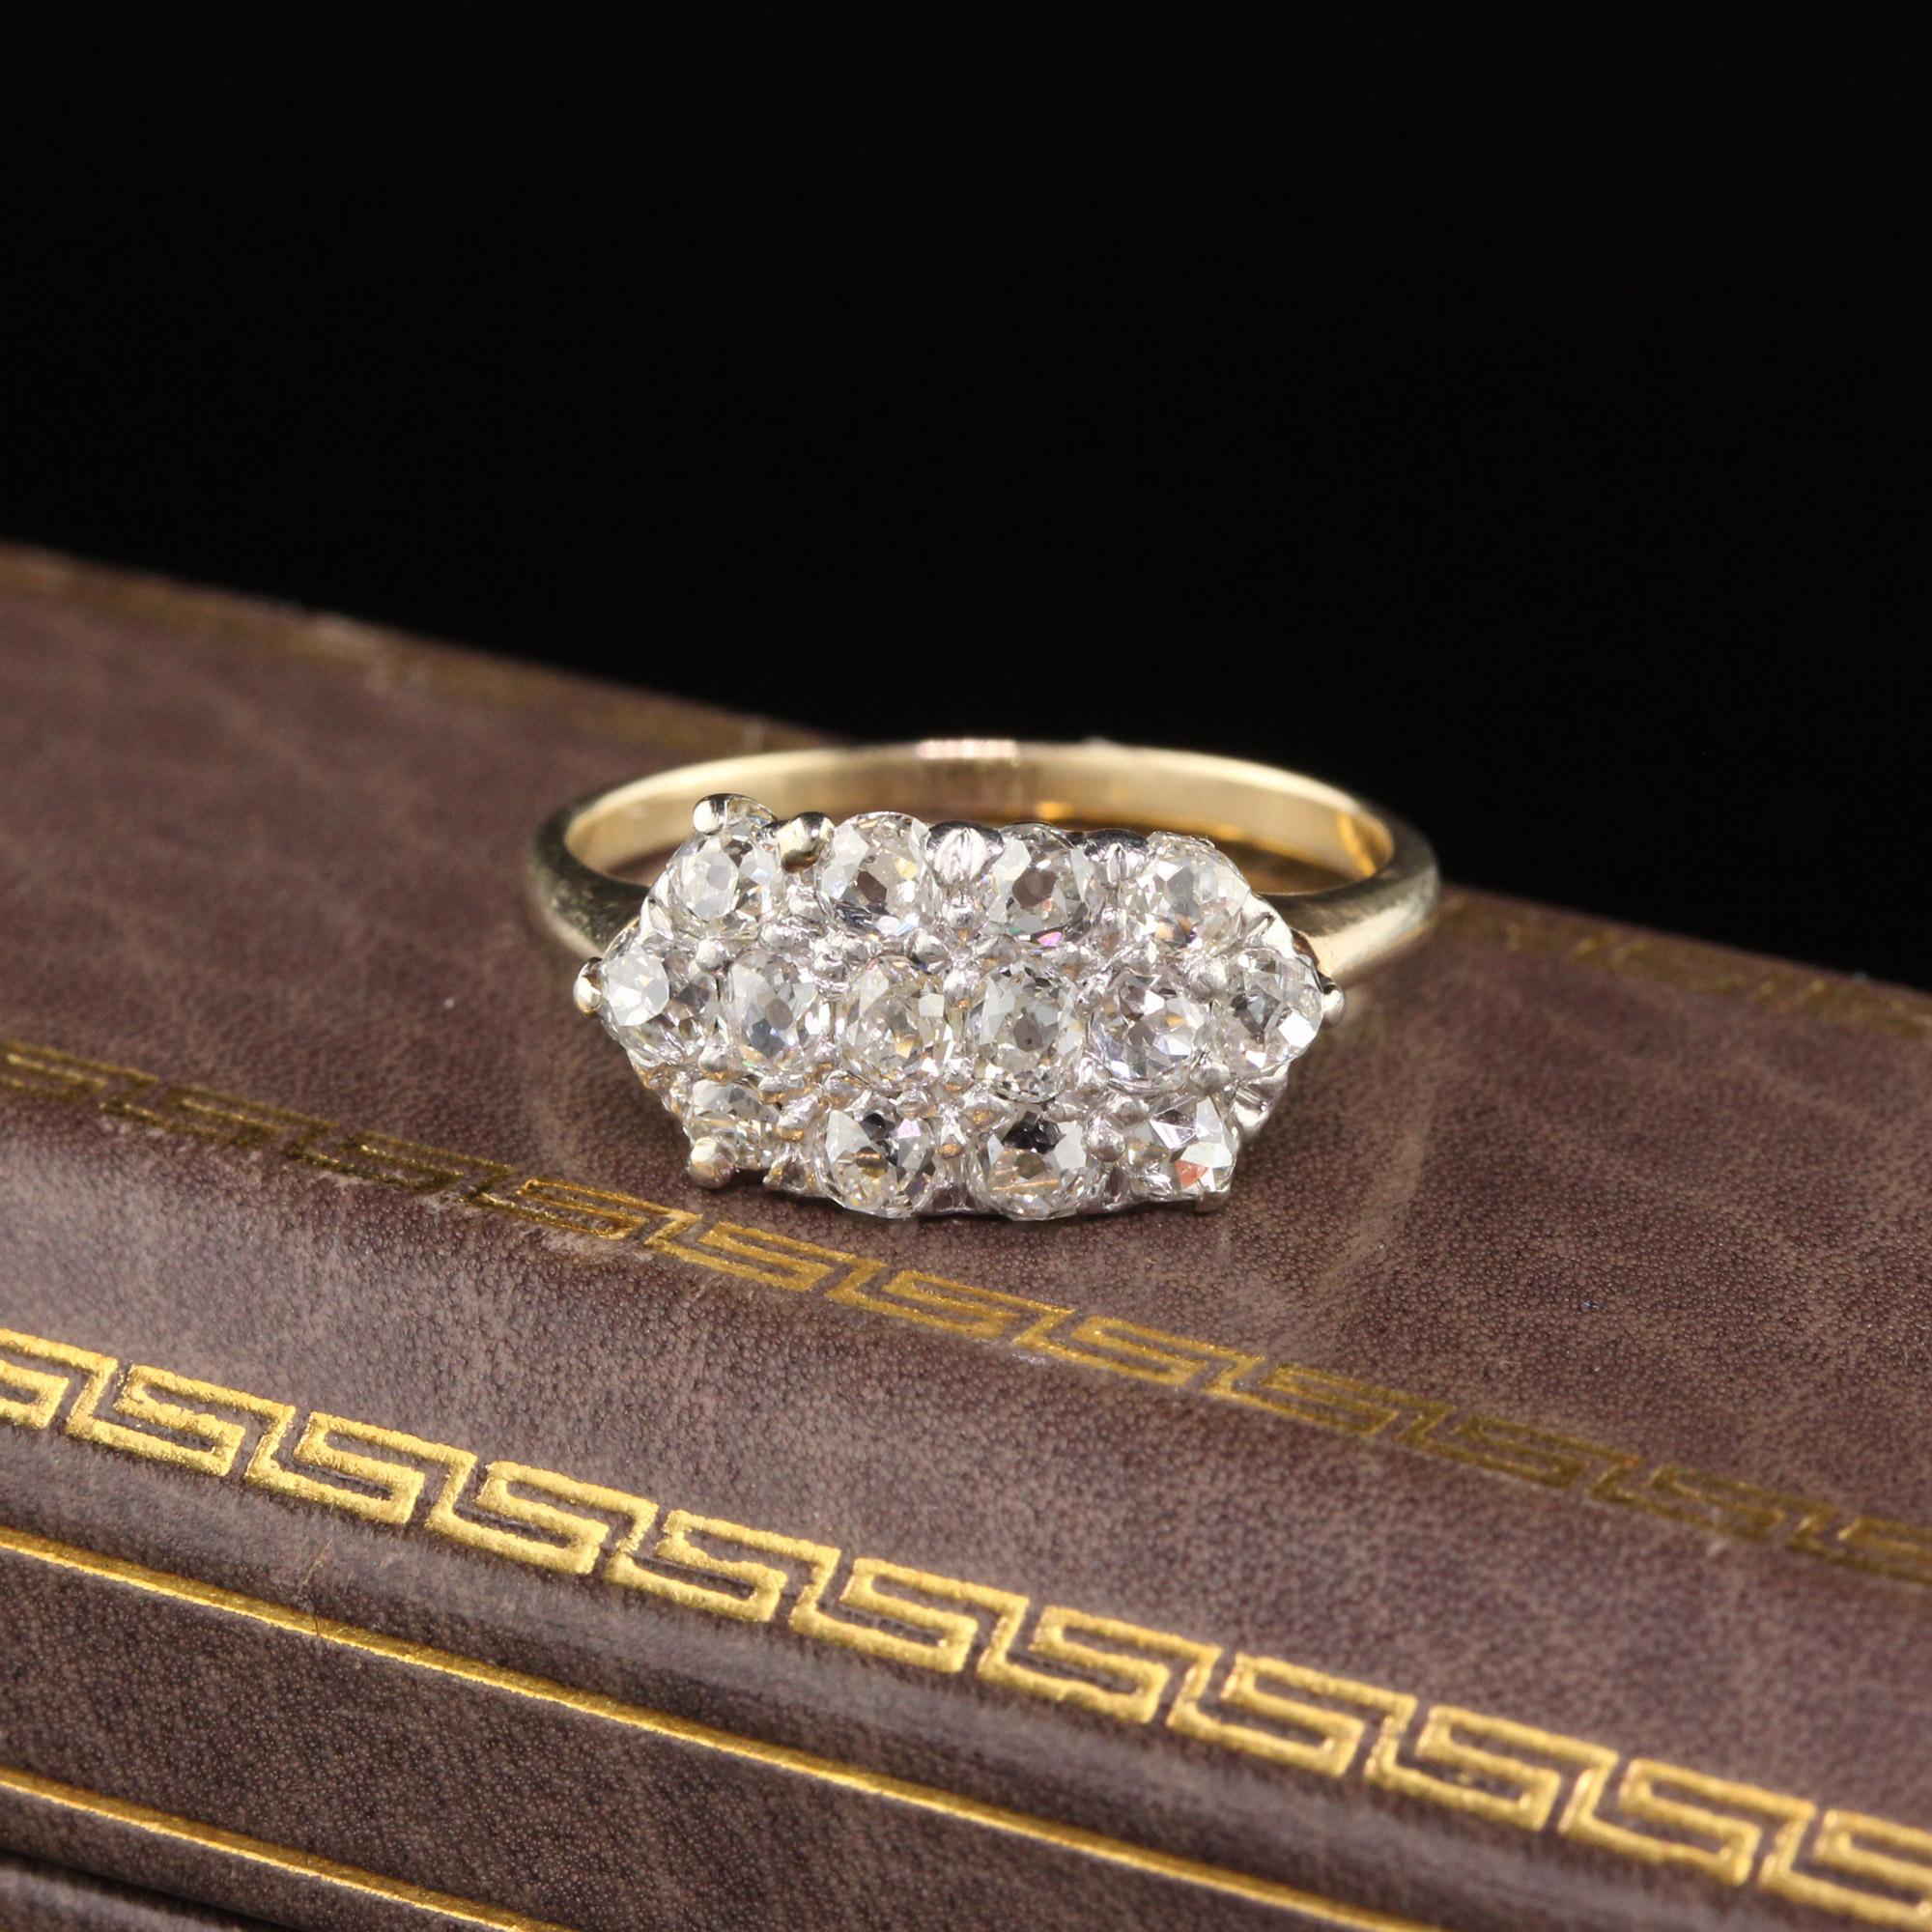 Beautiful classic Edwardian ring in yellow gold with a platinum top and three rows of sparkly chunky old mine cut diamonds.

#R0392

Metal: 14K Yellow Gold & Platinum Top

Weight: 2.4 Grams

Total Diamond Weight: Approximately 0.70 cts old mine cut